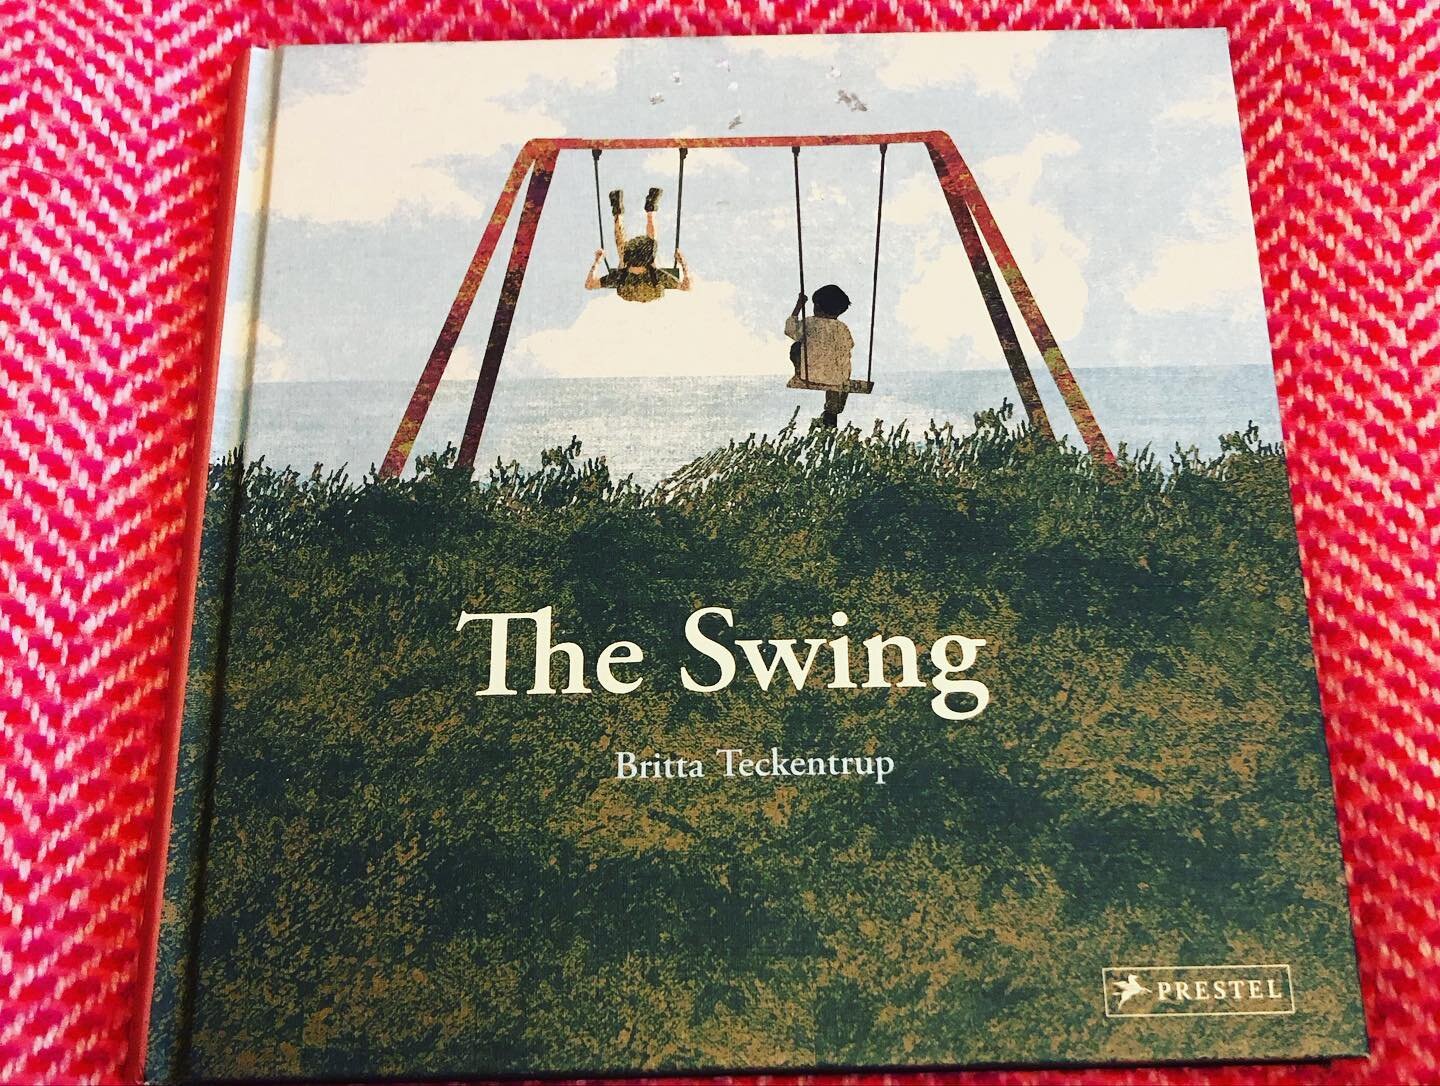 My home library is overflowing and I&rsquo;m trying not to buy so many books this year - but then a book like The Swing by @britta_teckentrup comes out and all that goes out the window. It&rsquo;s stunning!
Each spread shares a different illustration